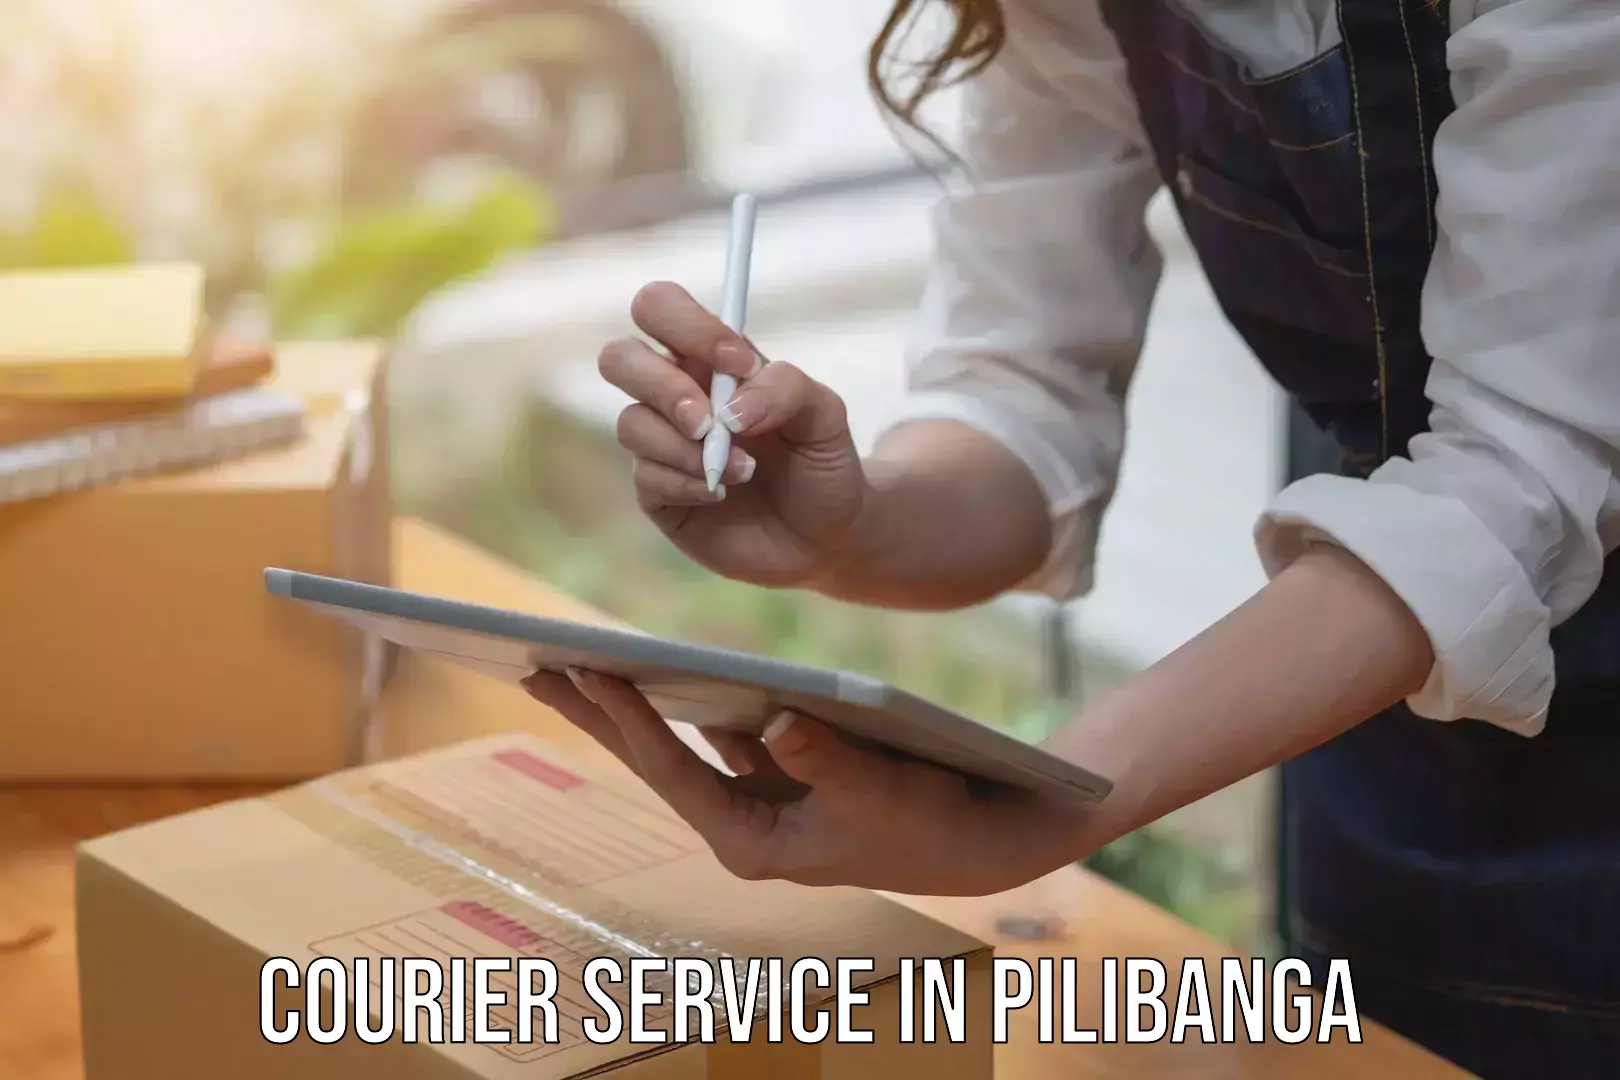 Streamlined delivery processes in Pilibanga